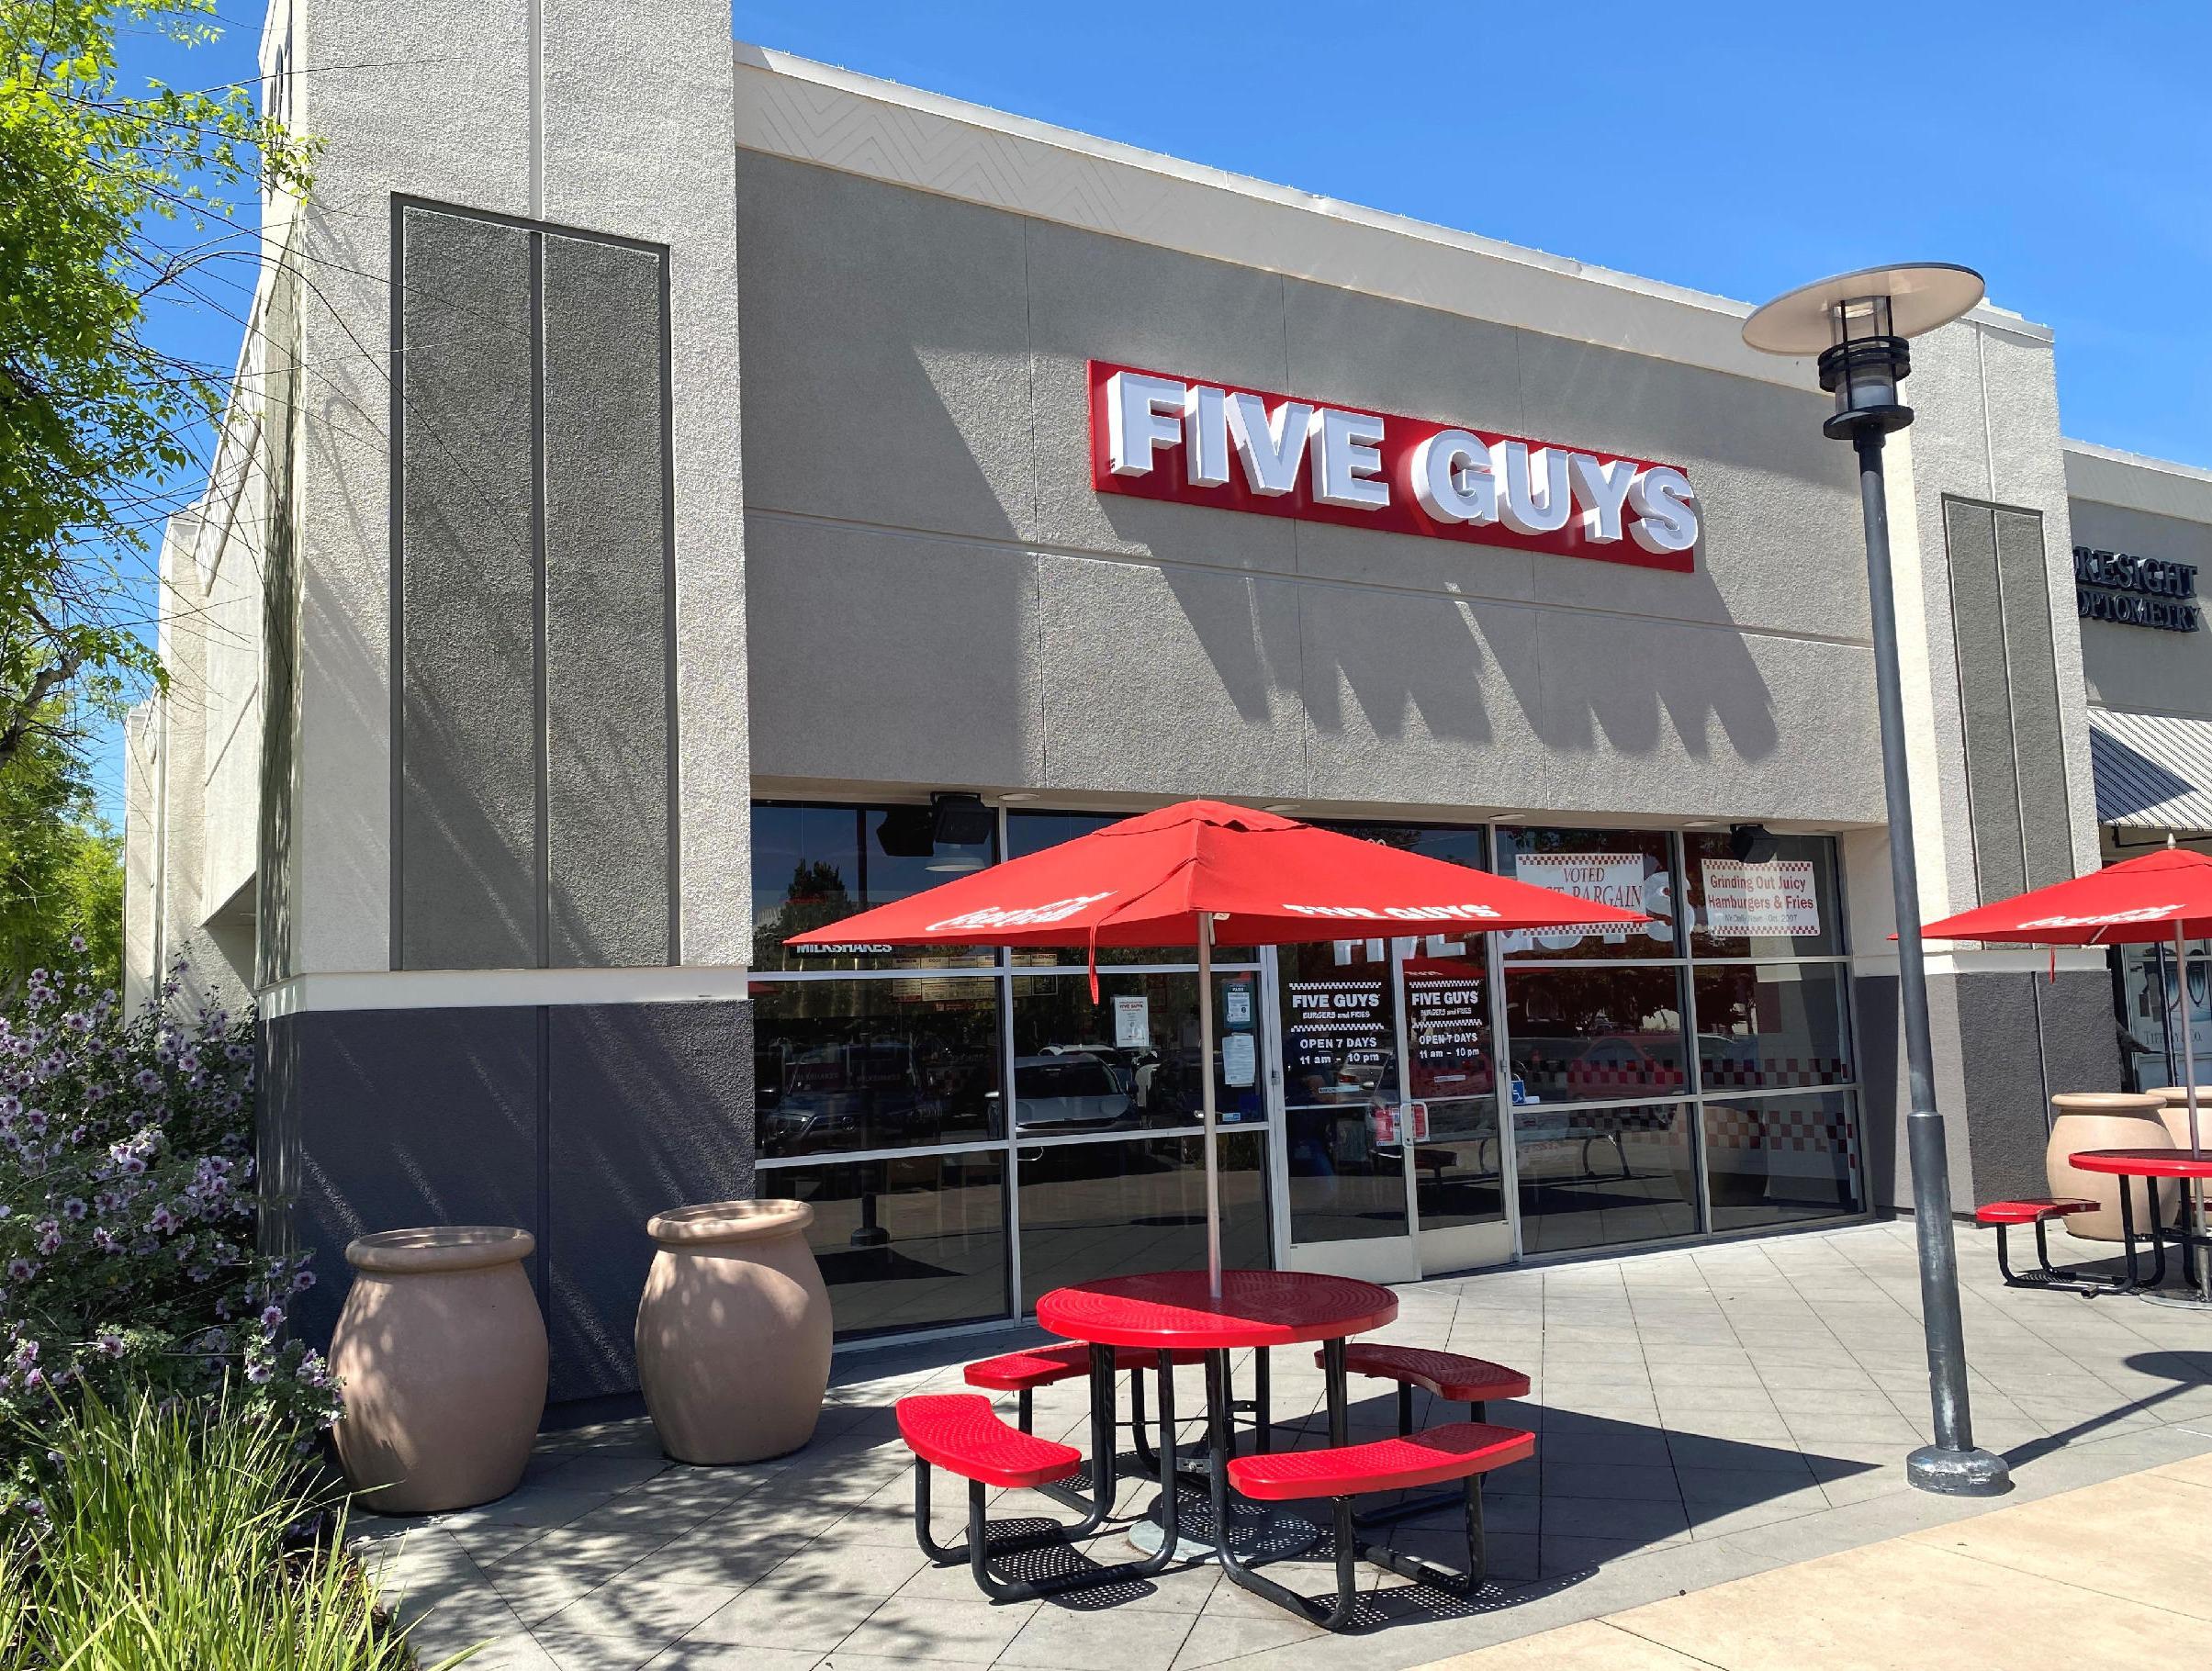 Exterior photograph of the Five Guys restaurant at 121 Curtner Avenue in San Jose, California.